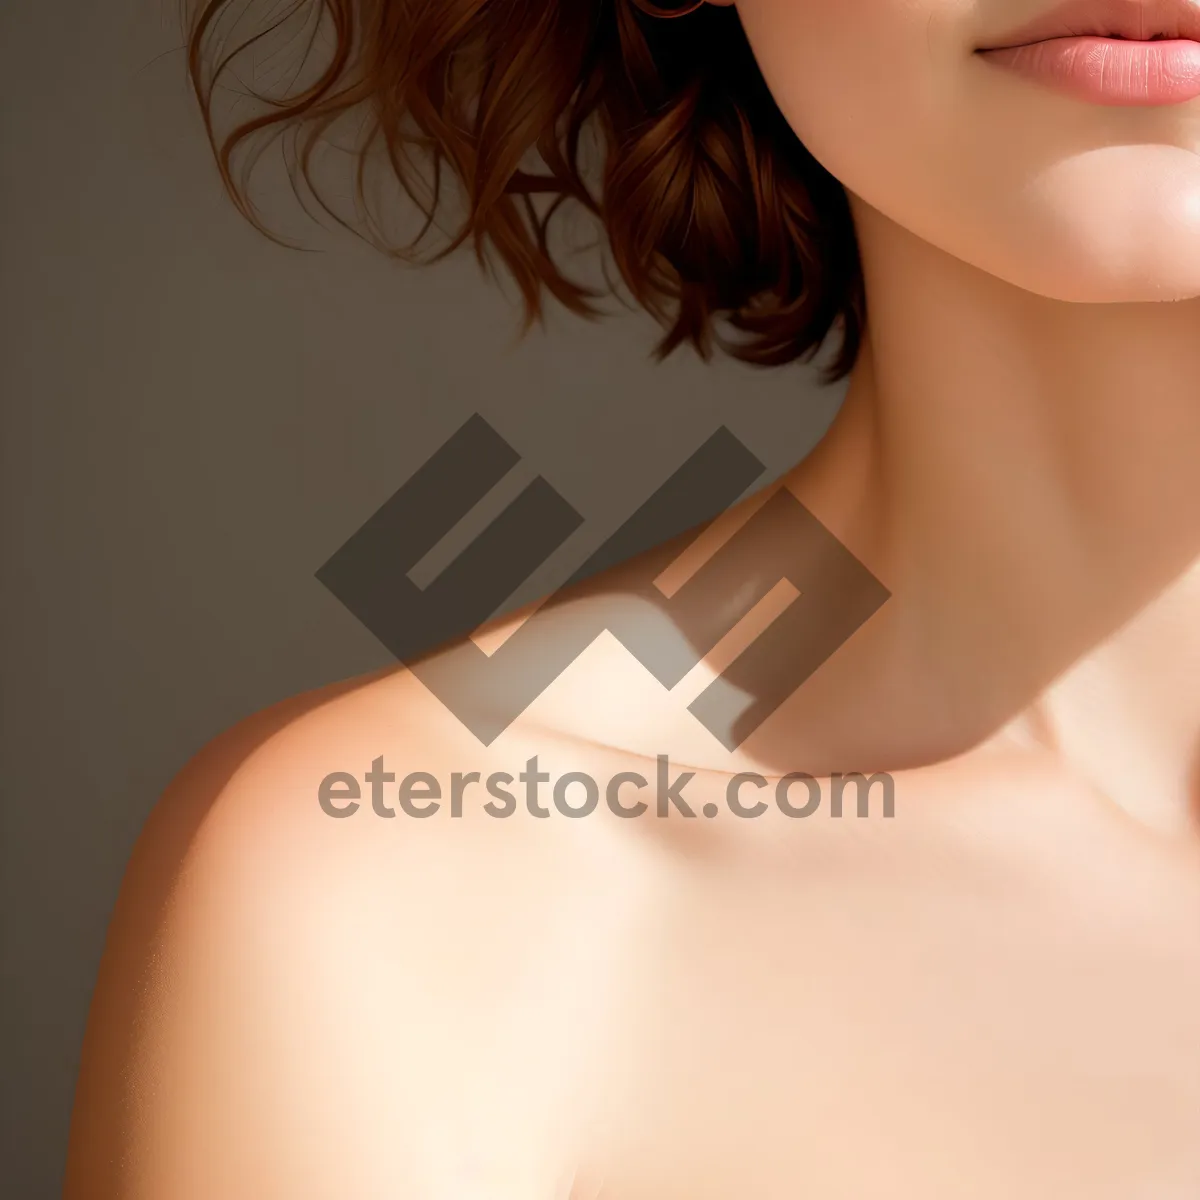 Picture of Radiant Beauty: Clean, Clear, and Attractive Skin